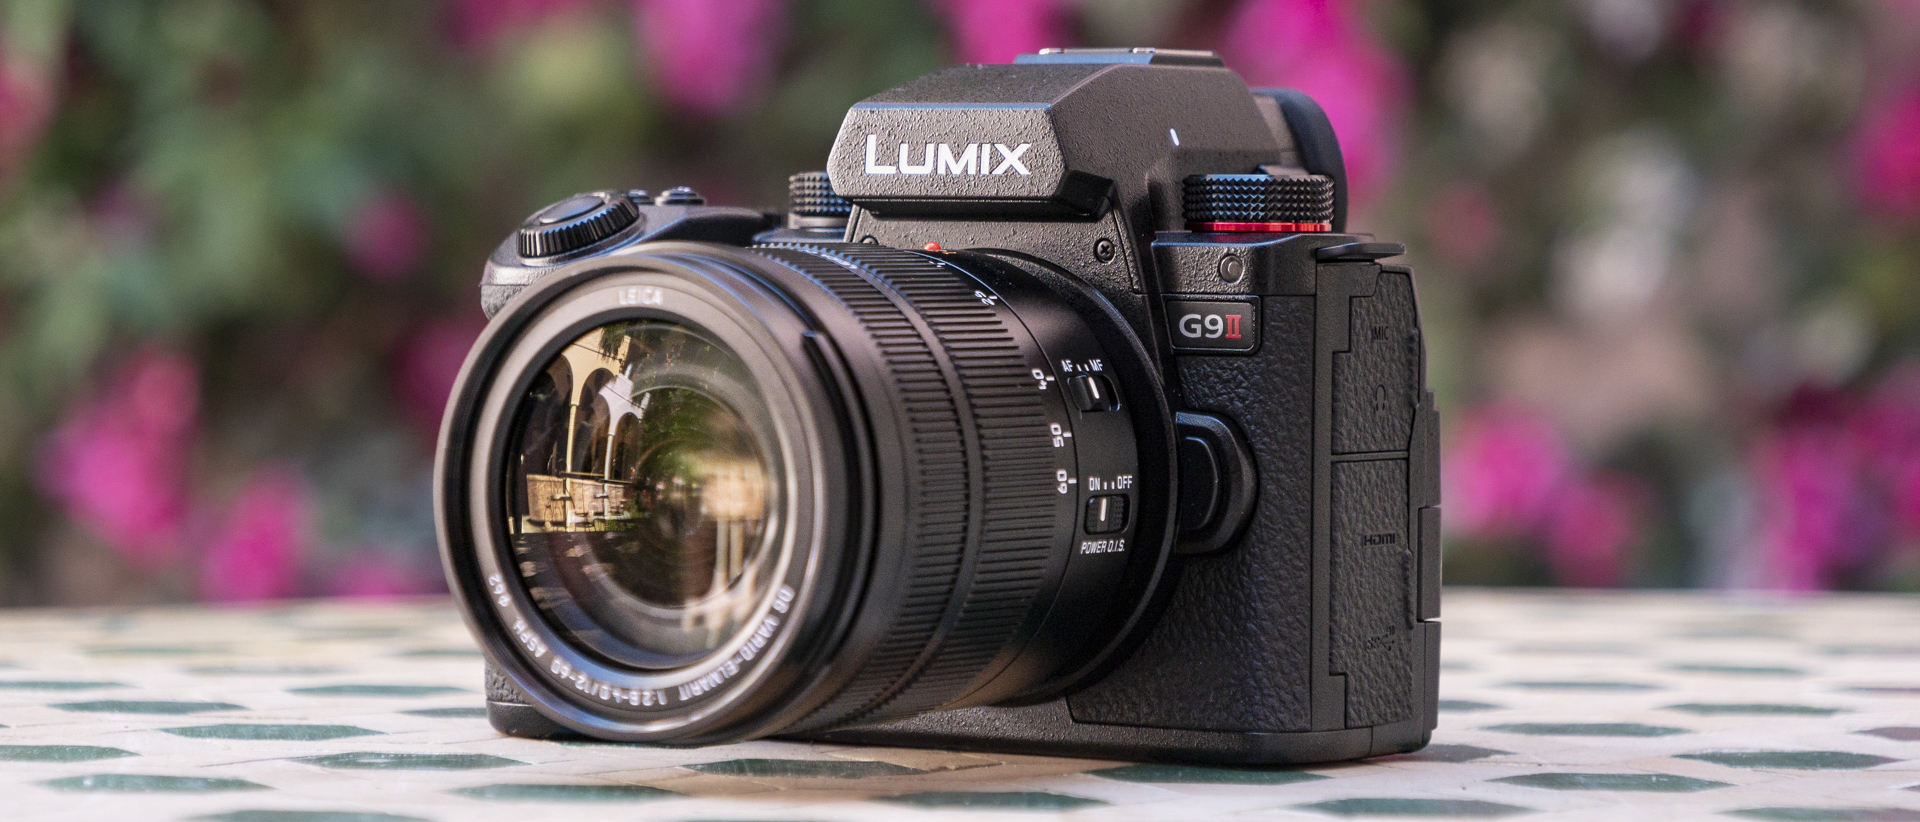 The Panasonic G9 II brings Phase-Detect Autofocus comes to Micro Four Thirds